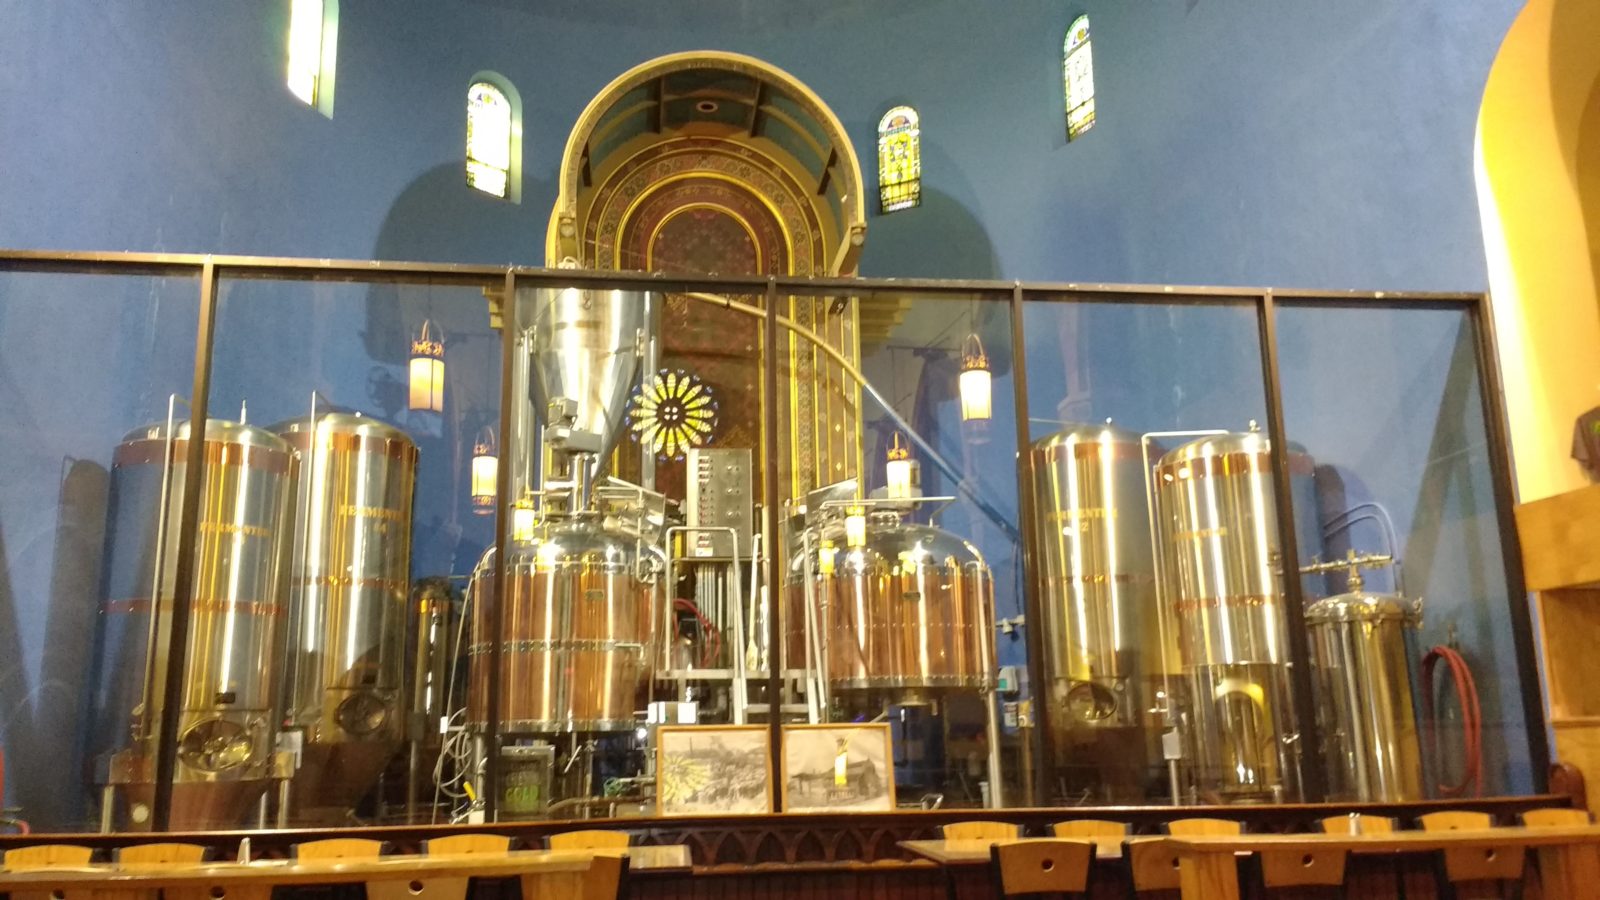 The Altar of Beer